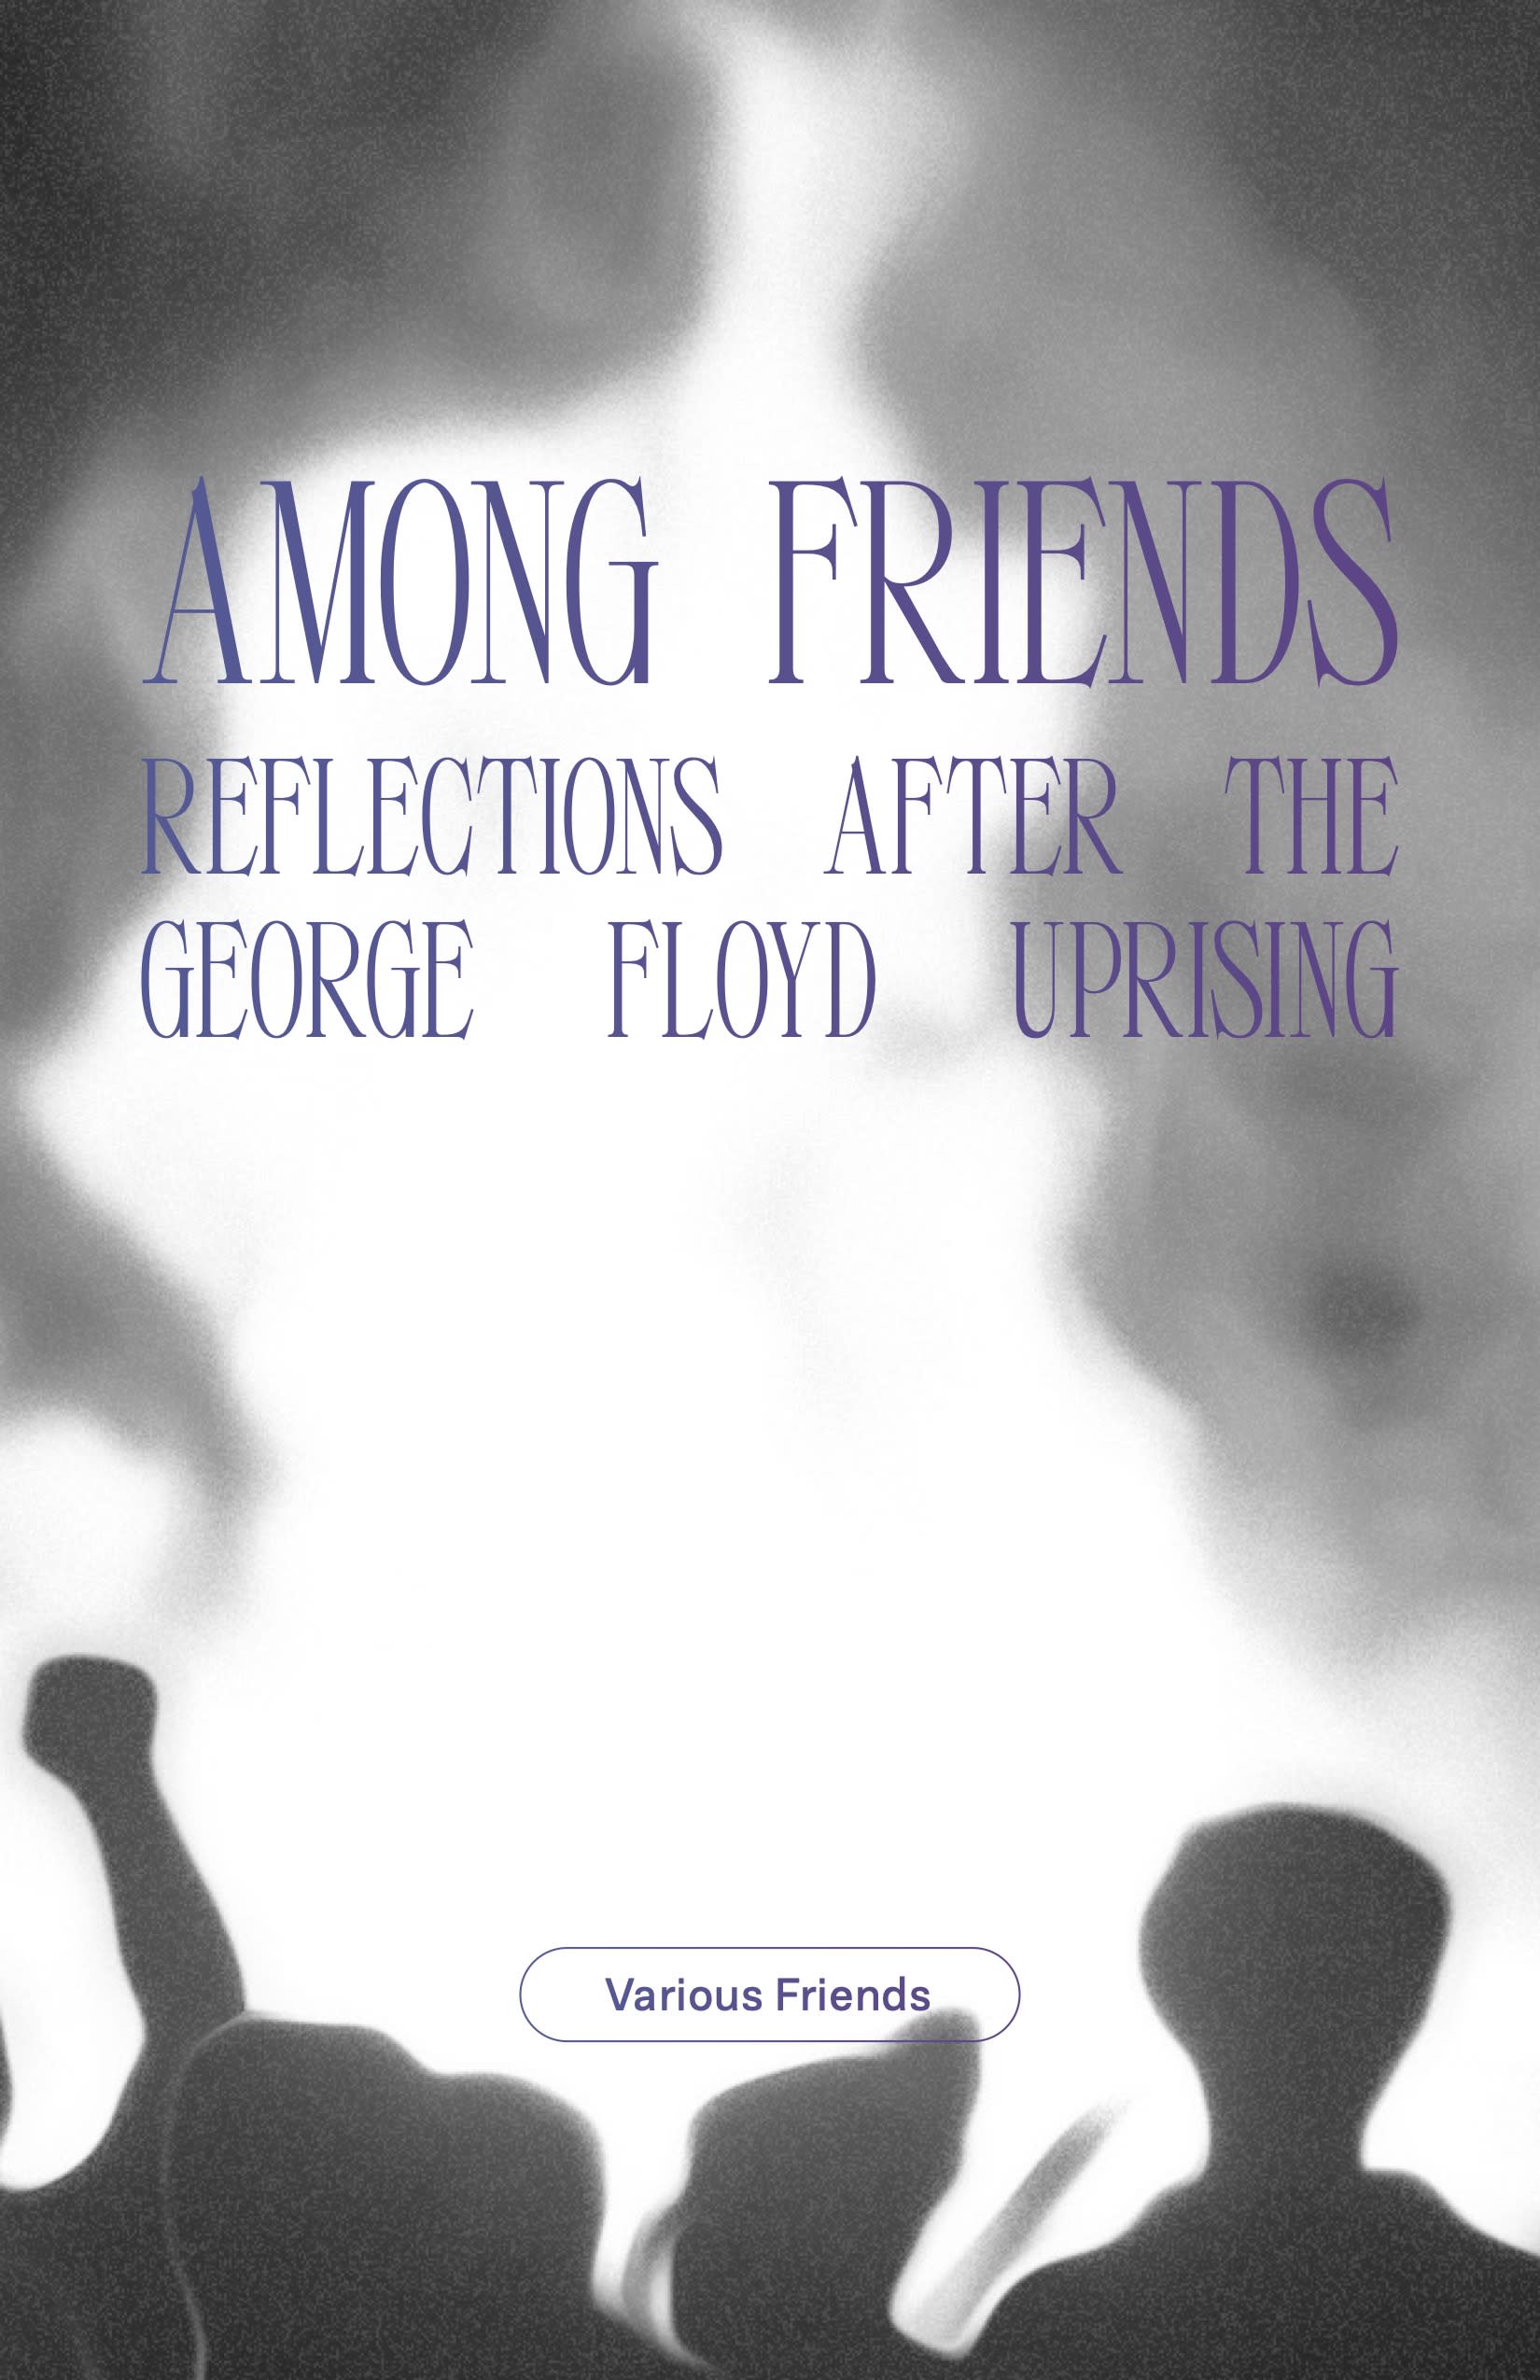 Cover Image for Among Friends: Reflections After the George Floyd Uprising